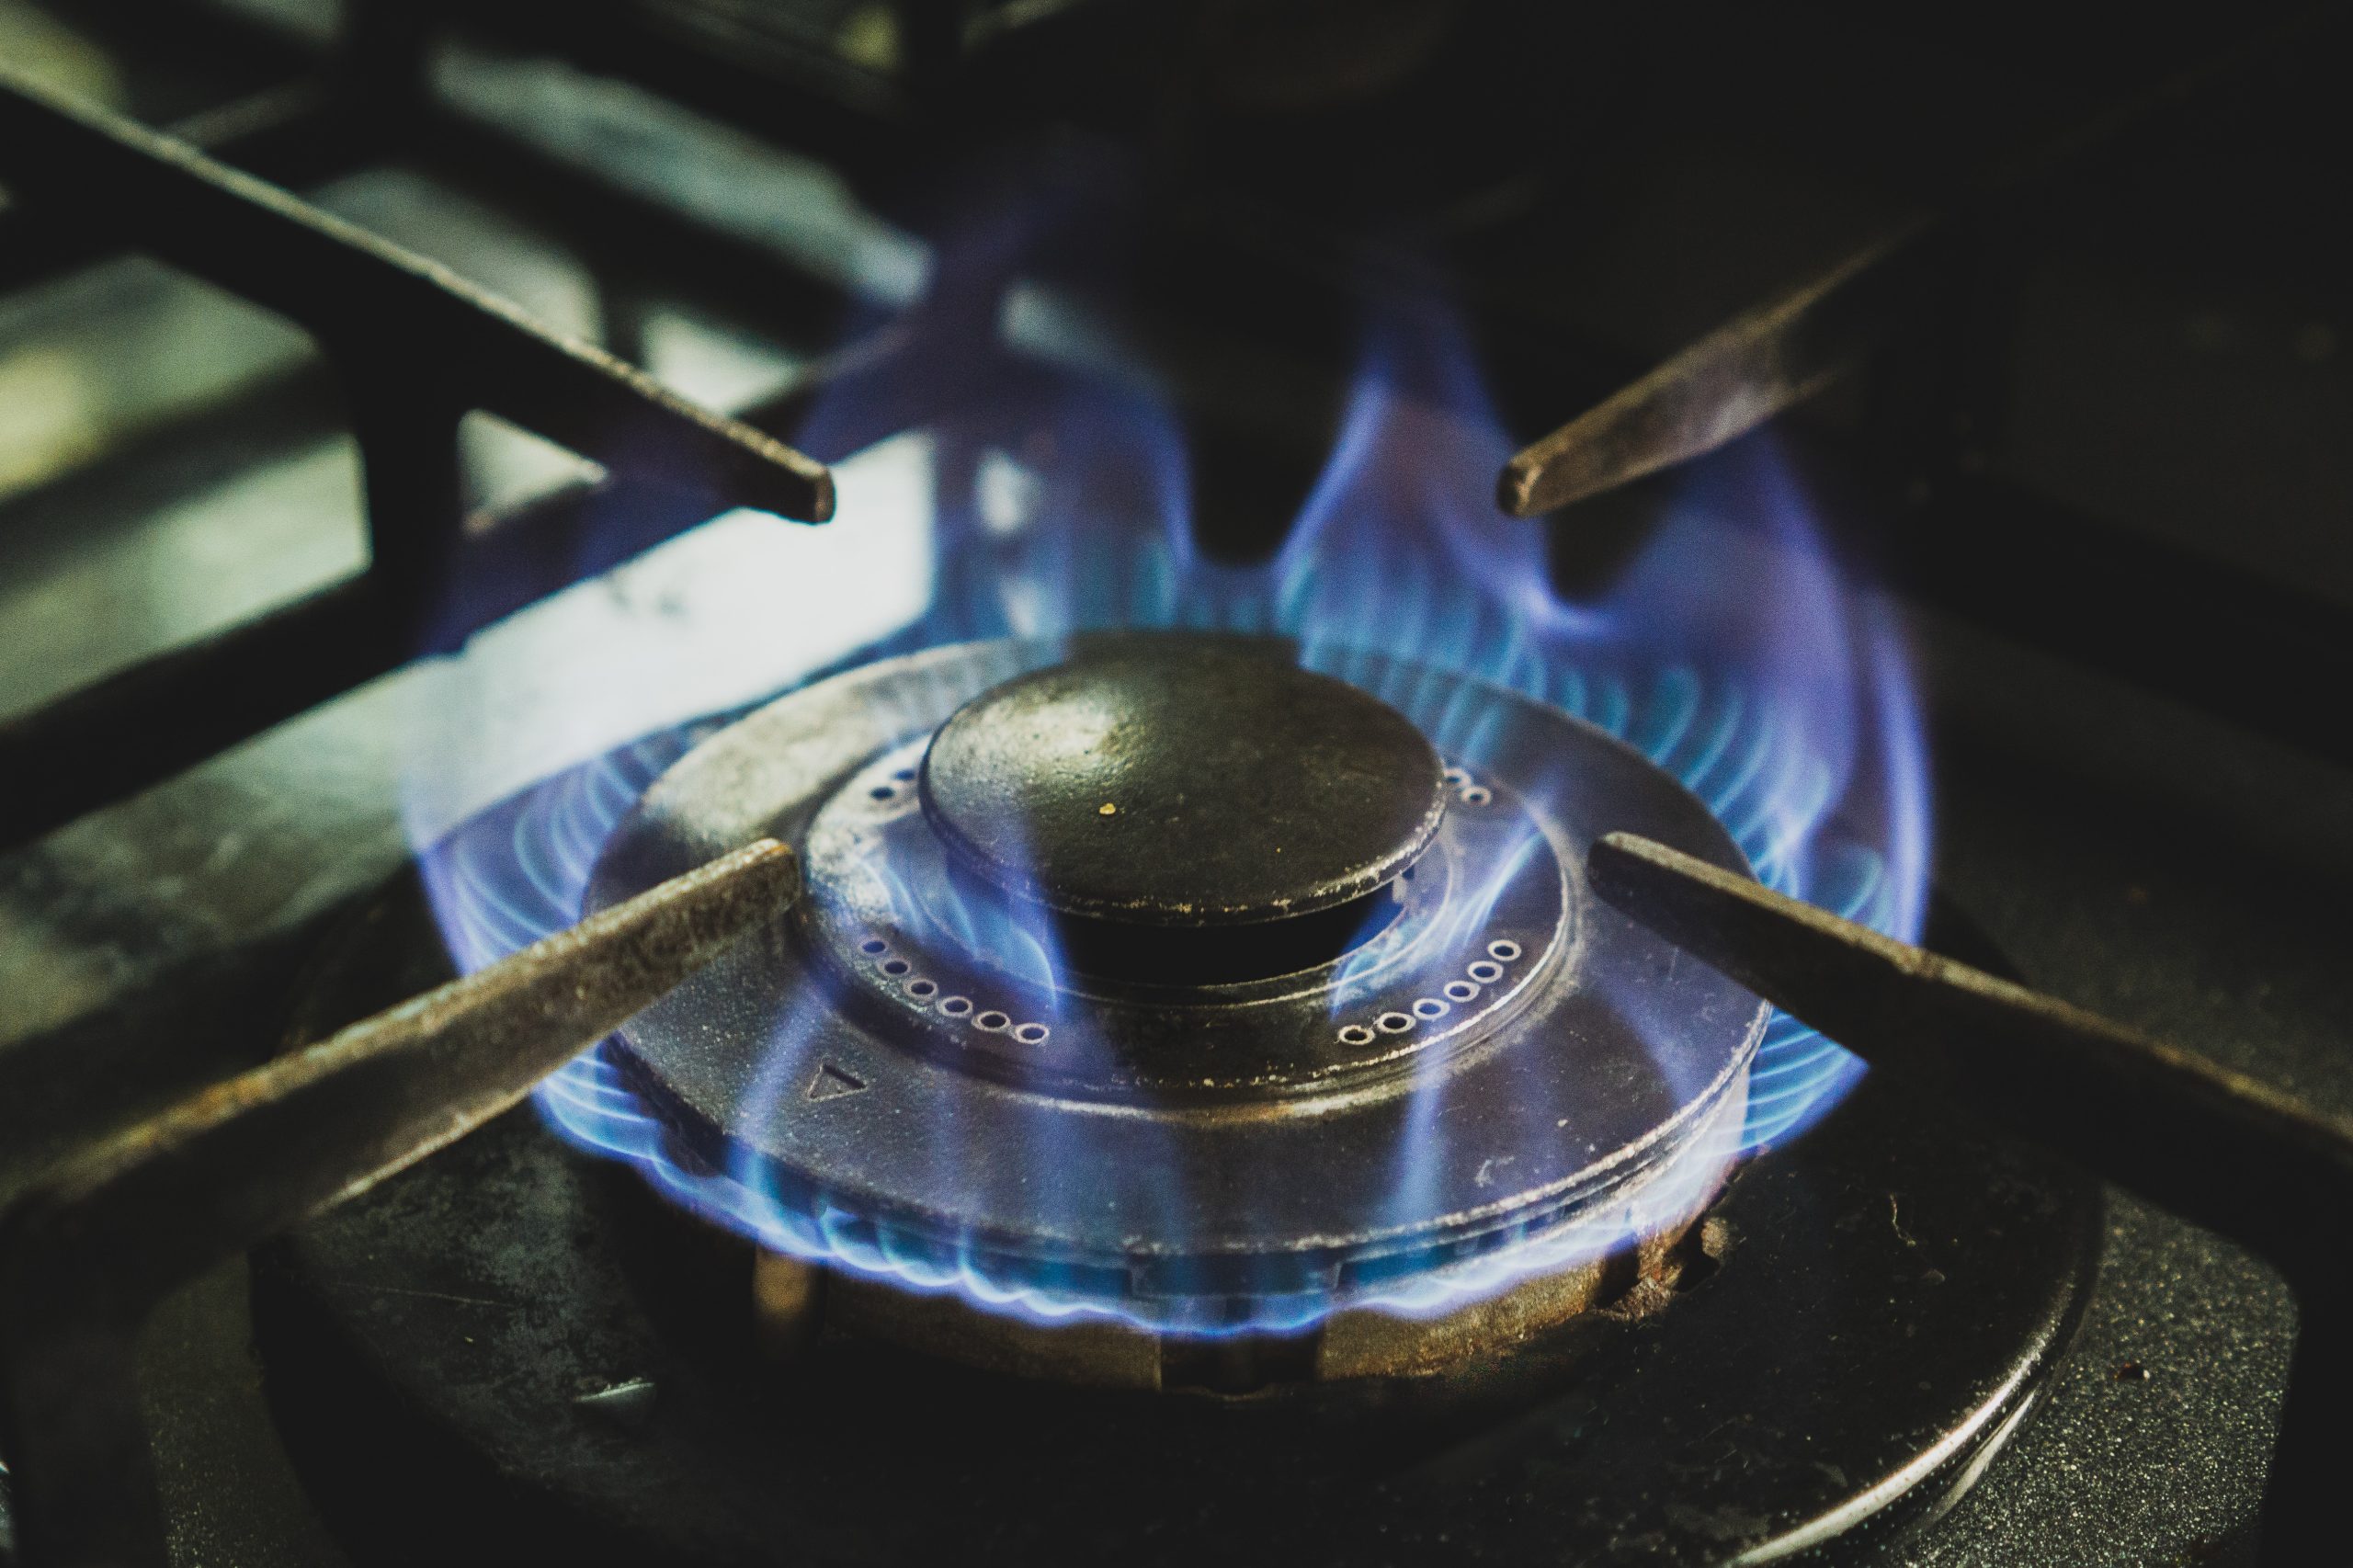 Gas stoves are even worse for our health than previously known, new study  finds » Yale Climate Connections